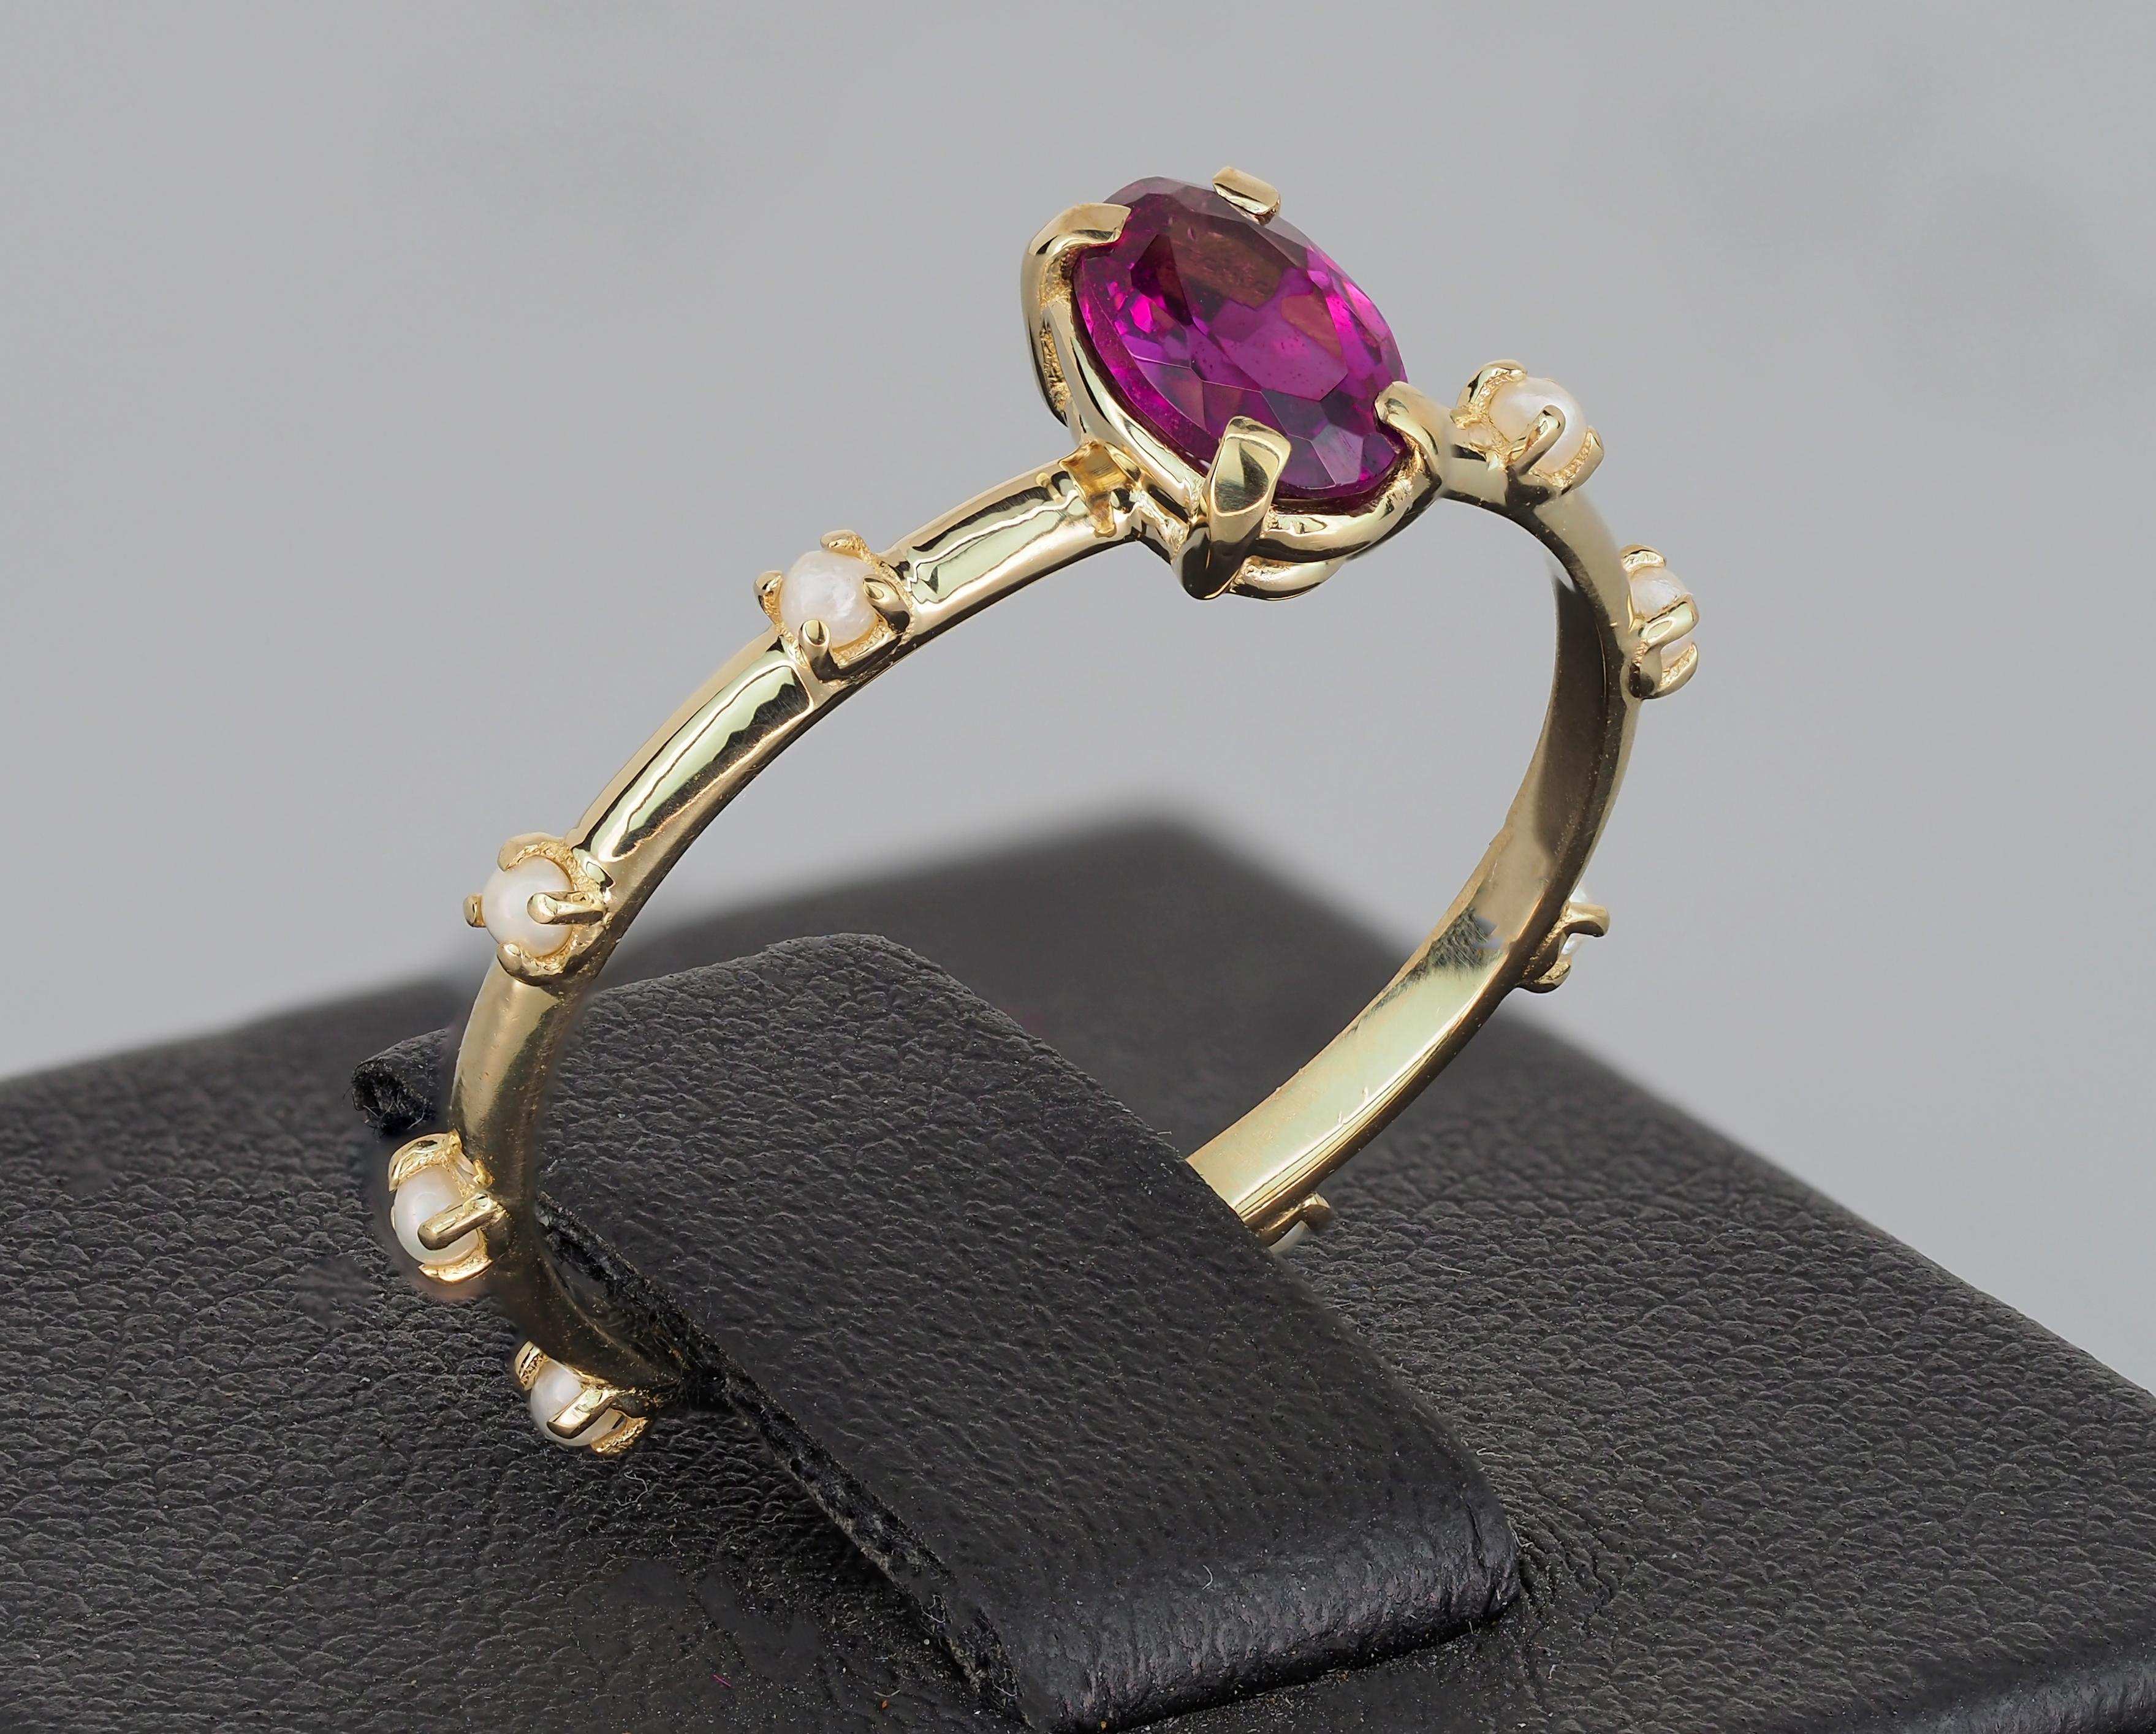 14k gold ring with garnet and pearls. Eternity gold ring.

Metal: 14k gold
Weight: 1.5 g. depends from choosed size.

Set with garnet, color - violetish red (can be little lighter or deeper - you can ask to choose stone in messages)
Oval cut, aprx